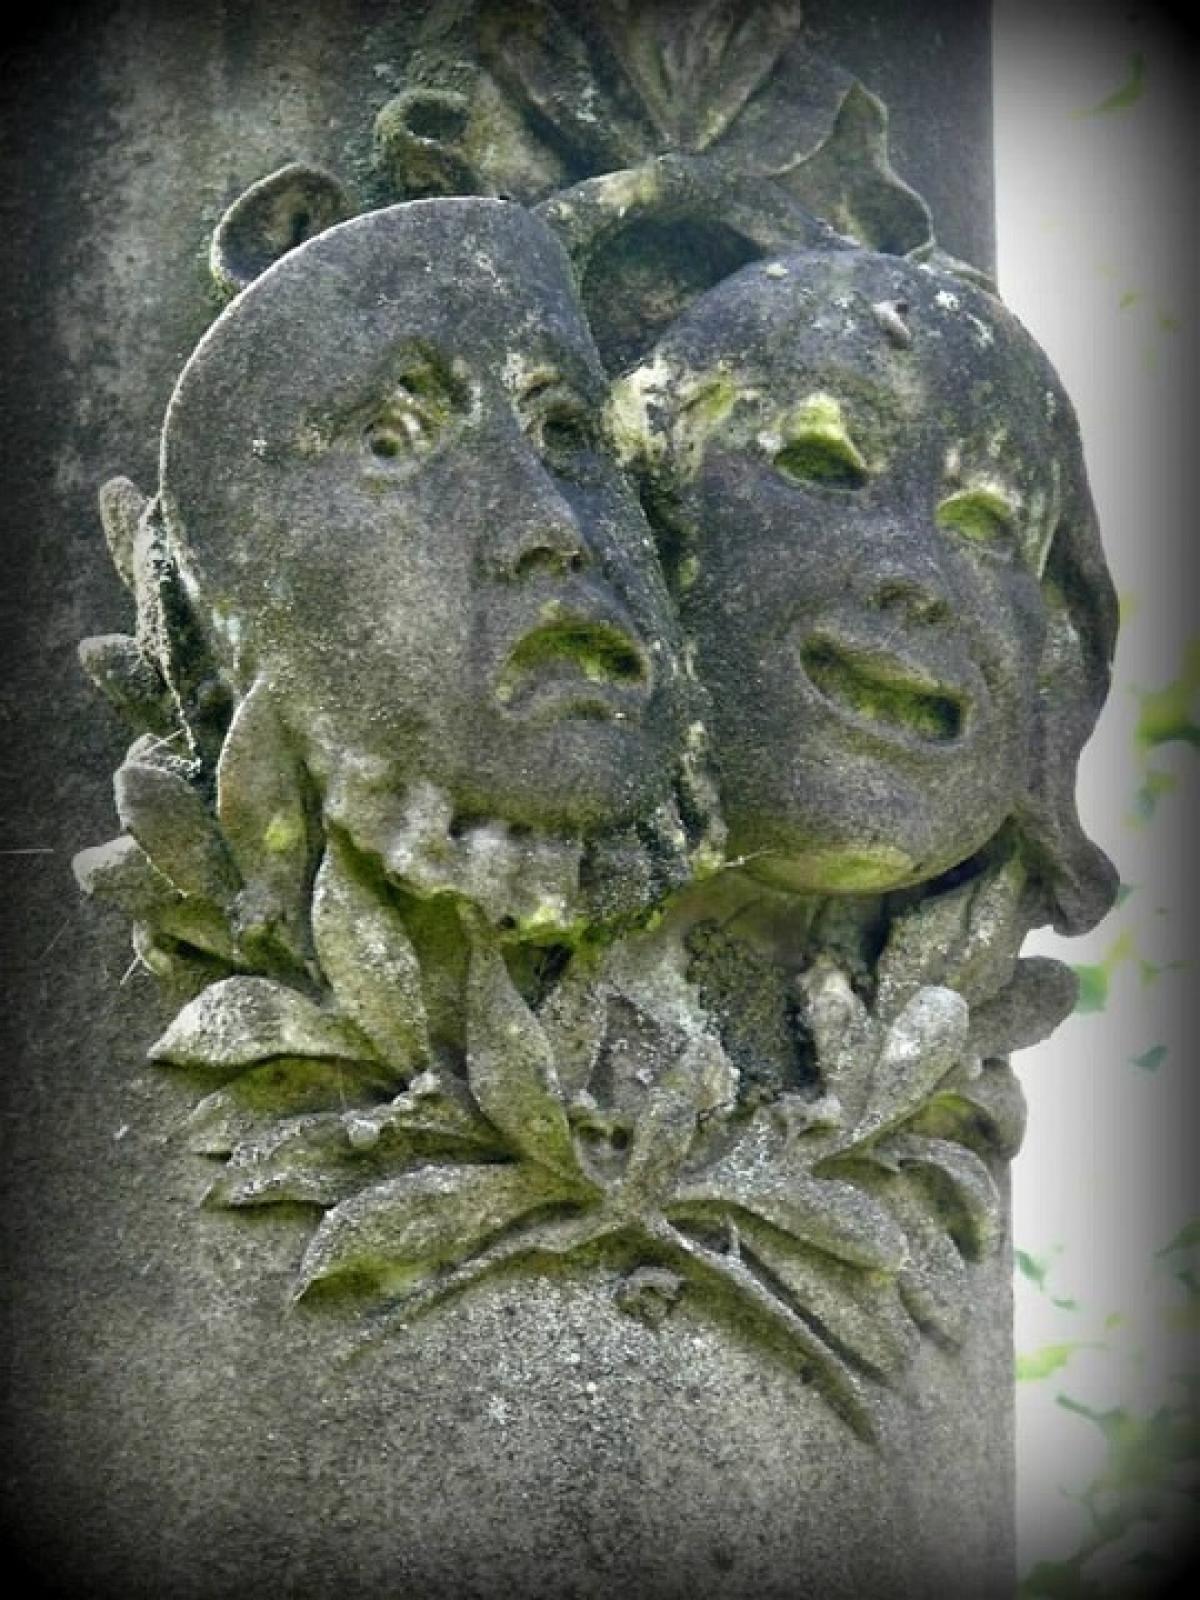 OK, Grove, Headstone Symbols and Meanings, Masks, Comedy & Tragedy